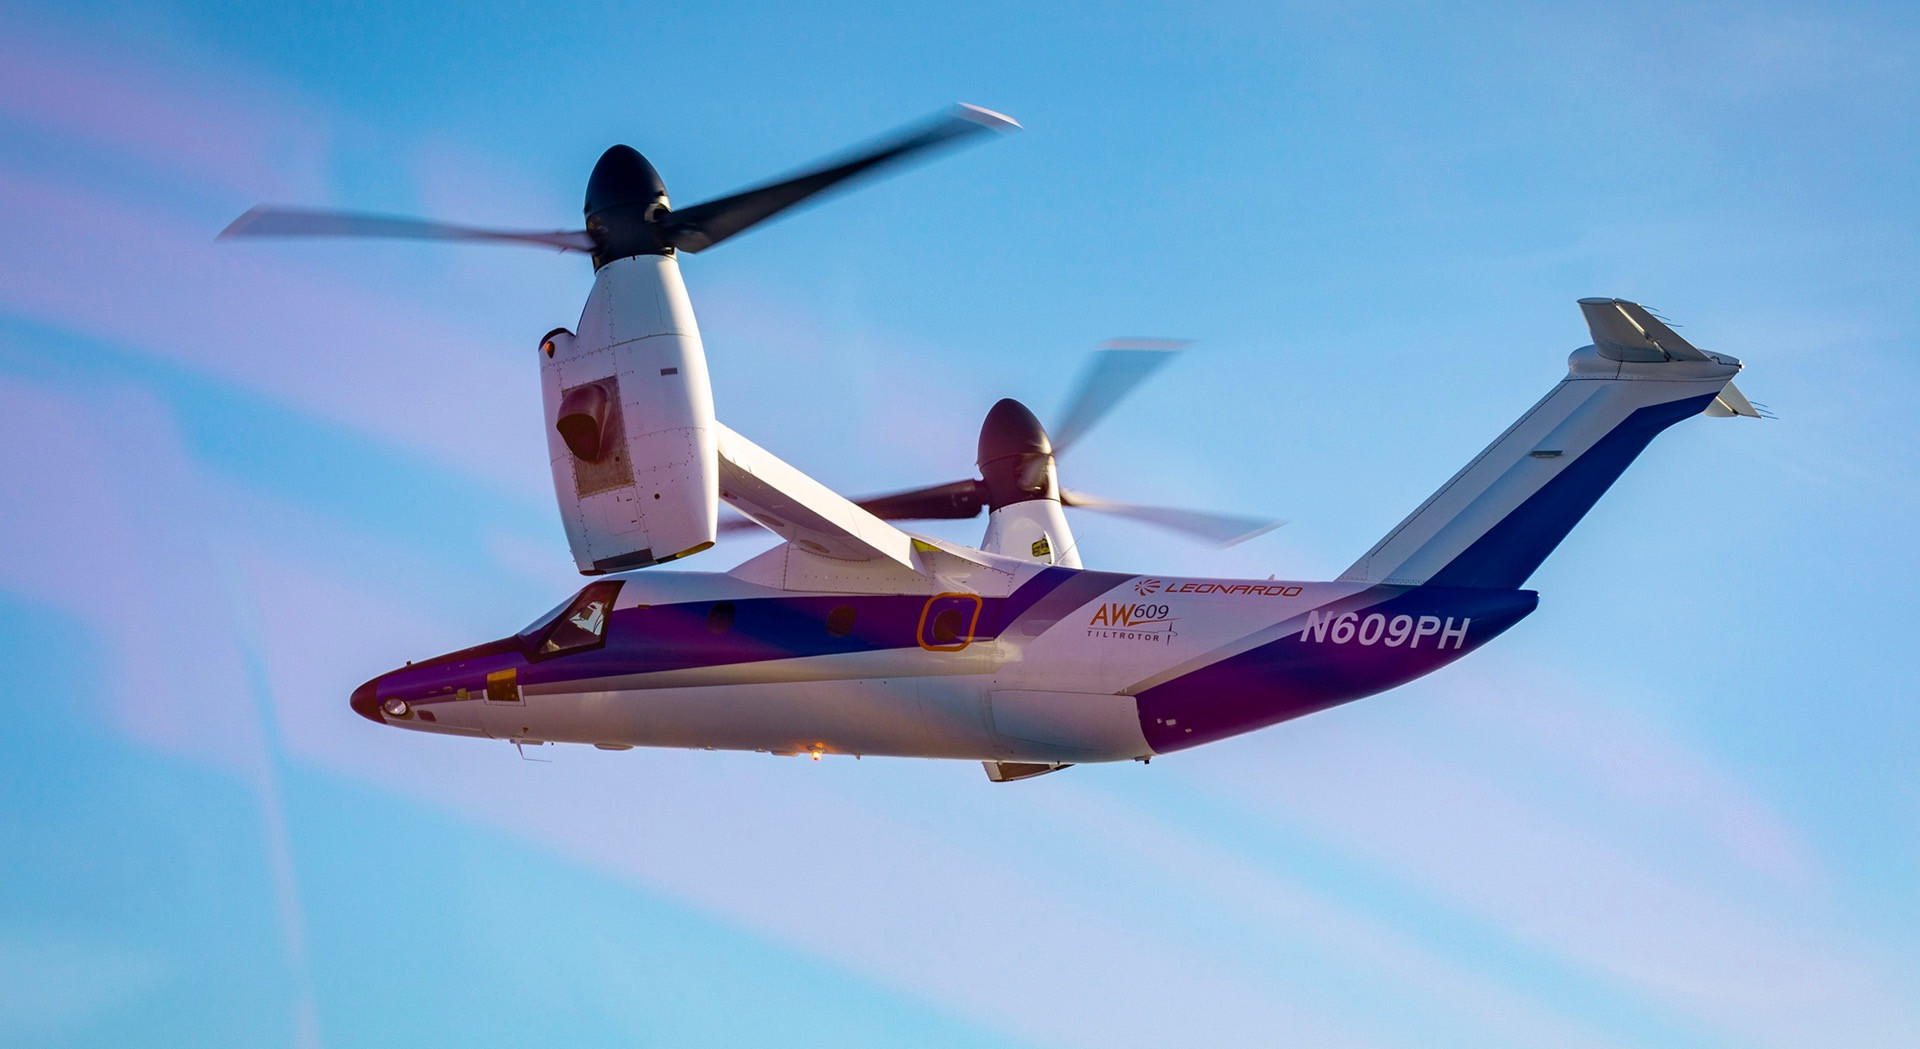 Leonardo signs new Agreement to supply AW609 tiltrotors